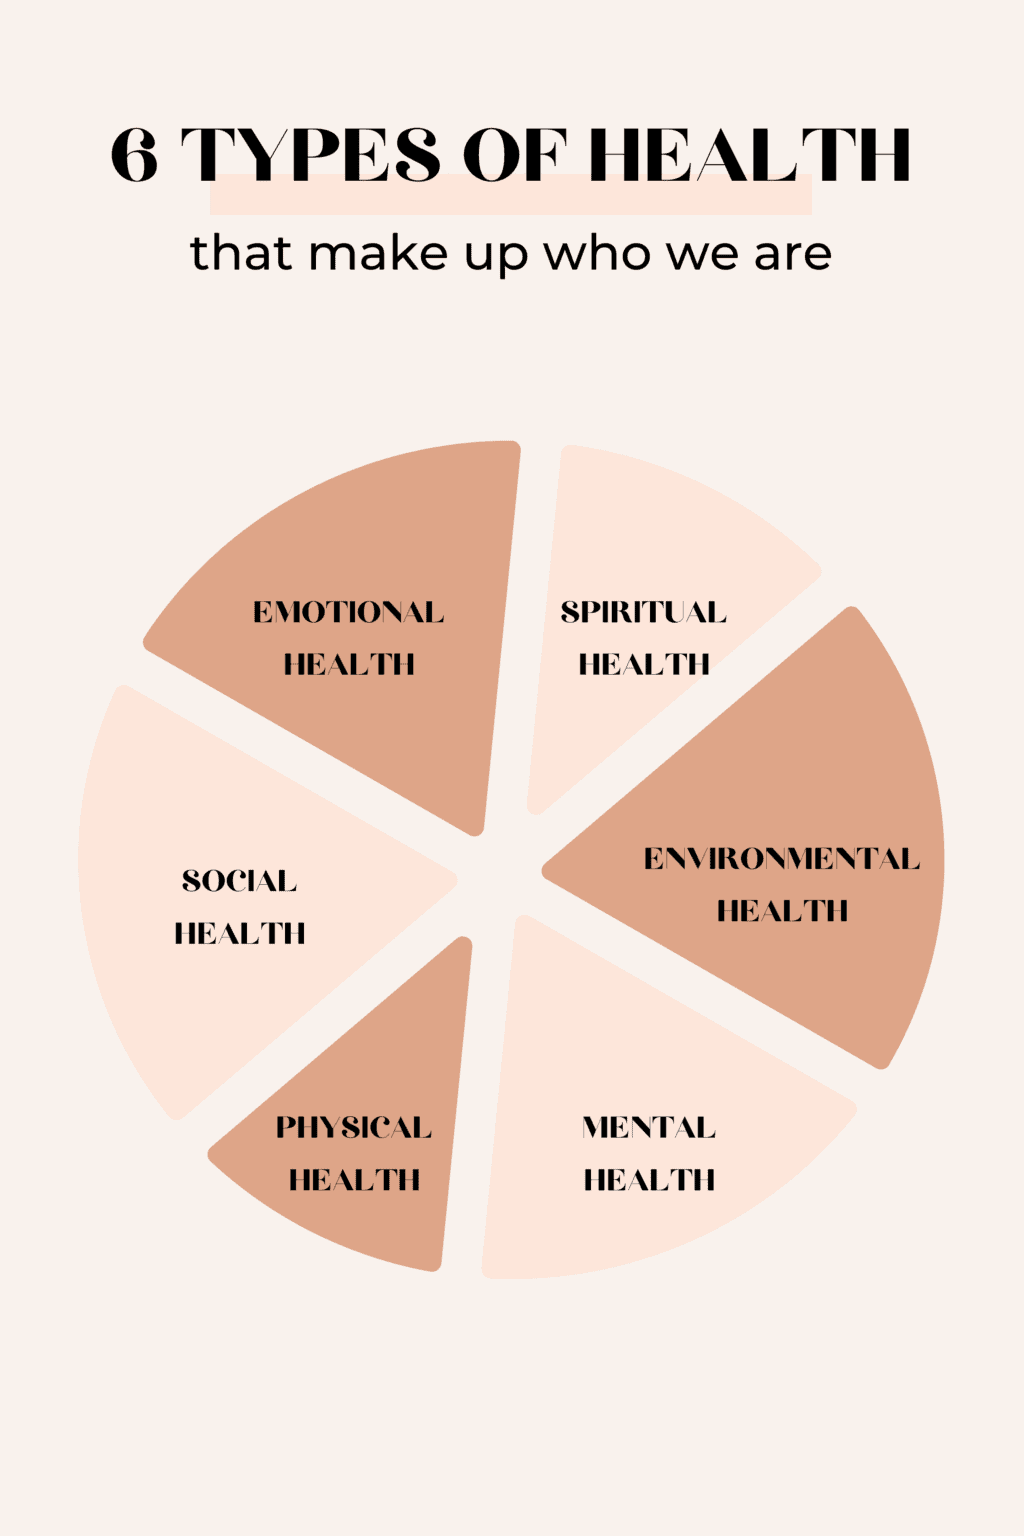 a pie chart split into 6 pieces demonstrating the 6 different types of health which are: emotional health, spiritual health, environmental health, mental health, physical health, social health, and emotional health